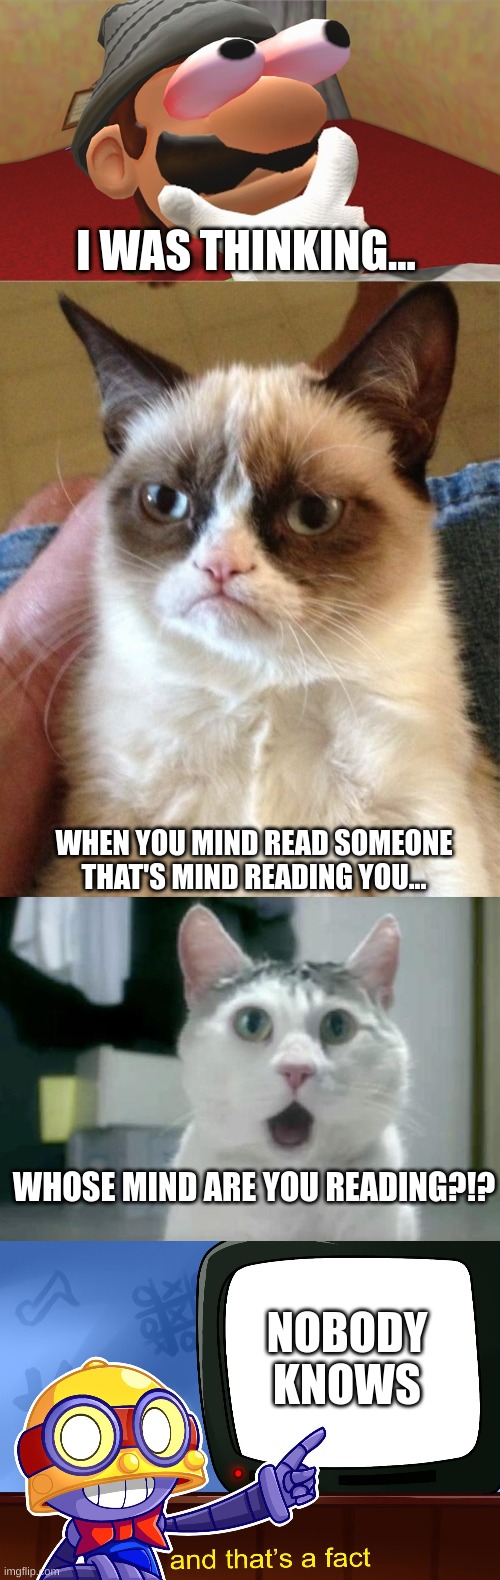  I WAS THINKING... WHEN YOU MIND READ SOMEONE THAT'S MIND READING YOU... WHOSE MIND ARE YOU READING?!? NOBODY KNOWS | image tagged in memes,grumpy cat,omg cat,true carl,funny,hmmm | made w/ Imgflip meme maker